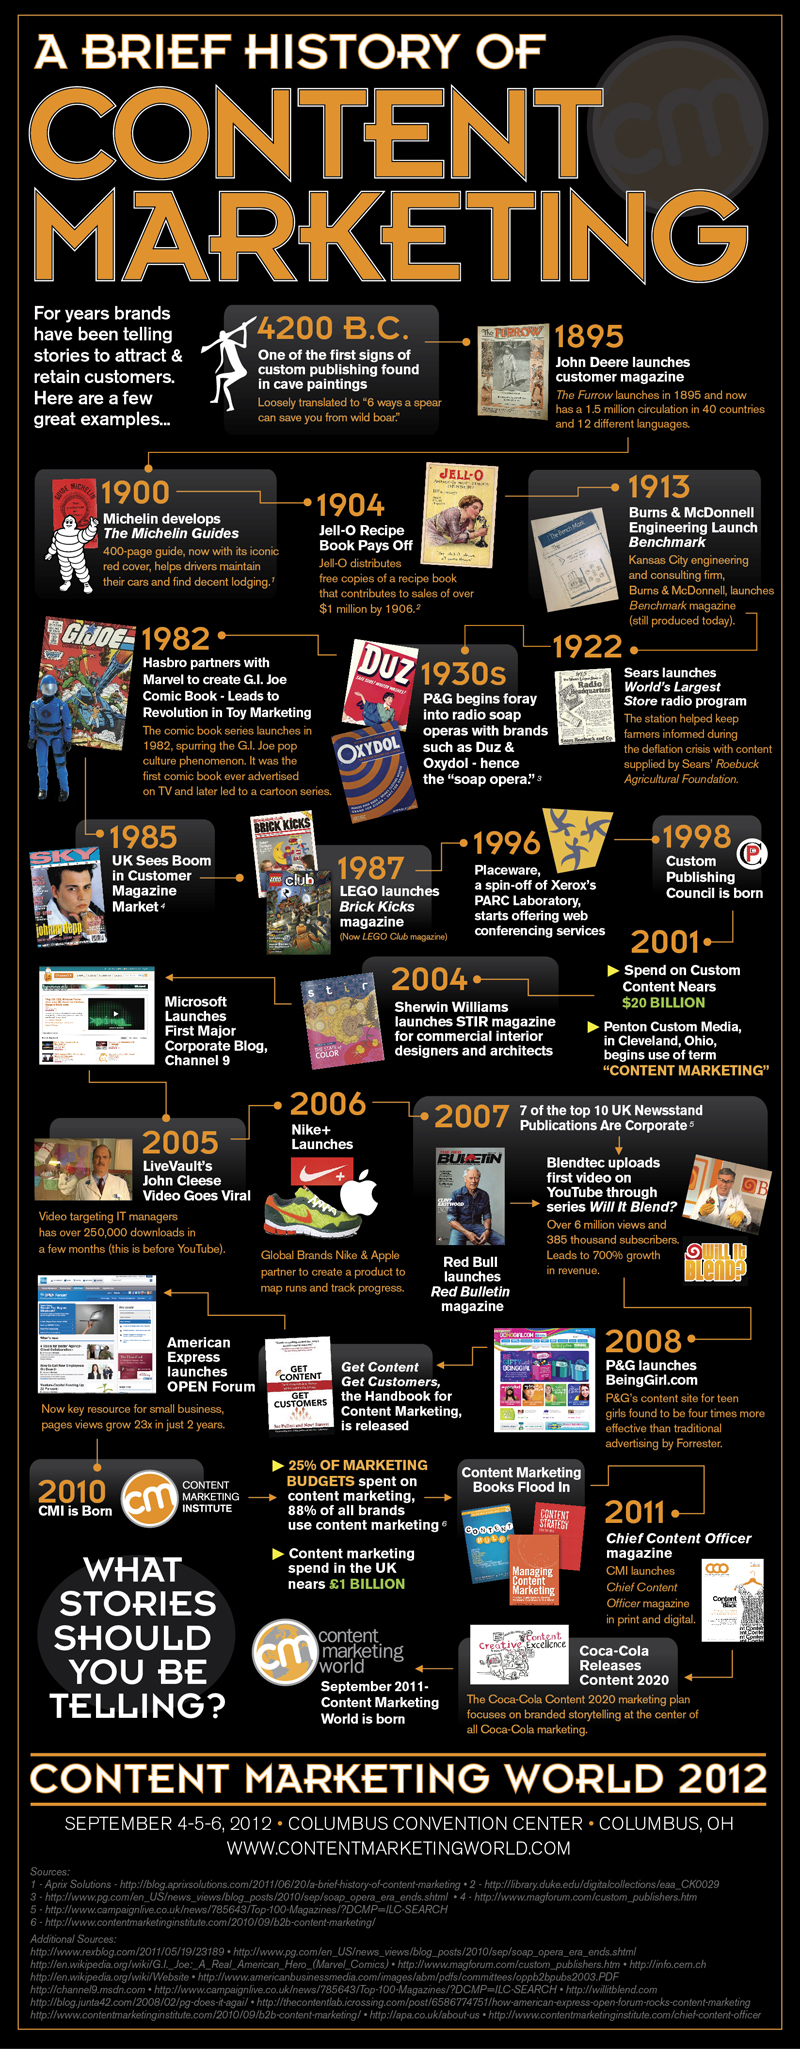 The history of content marketing.